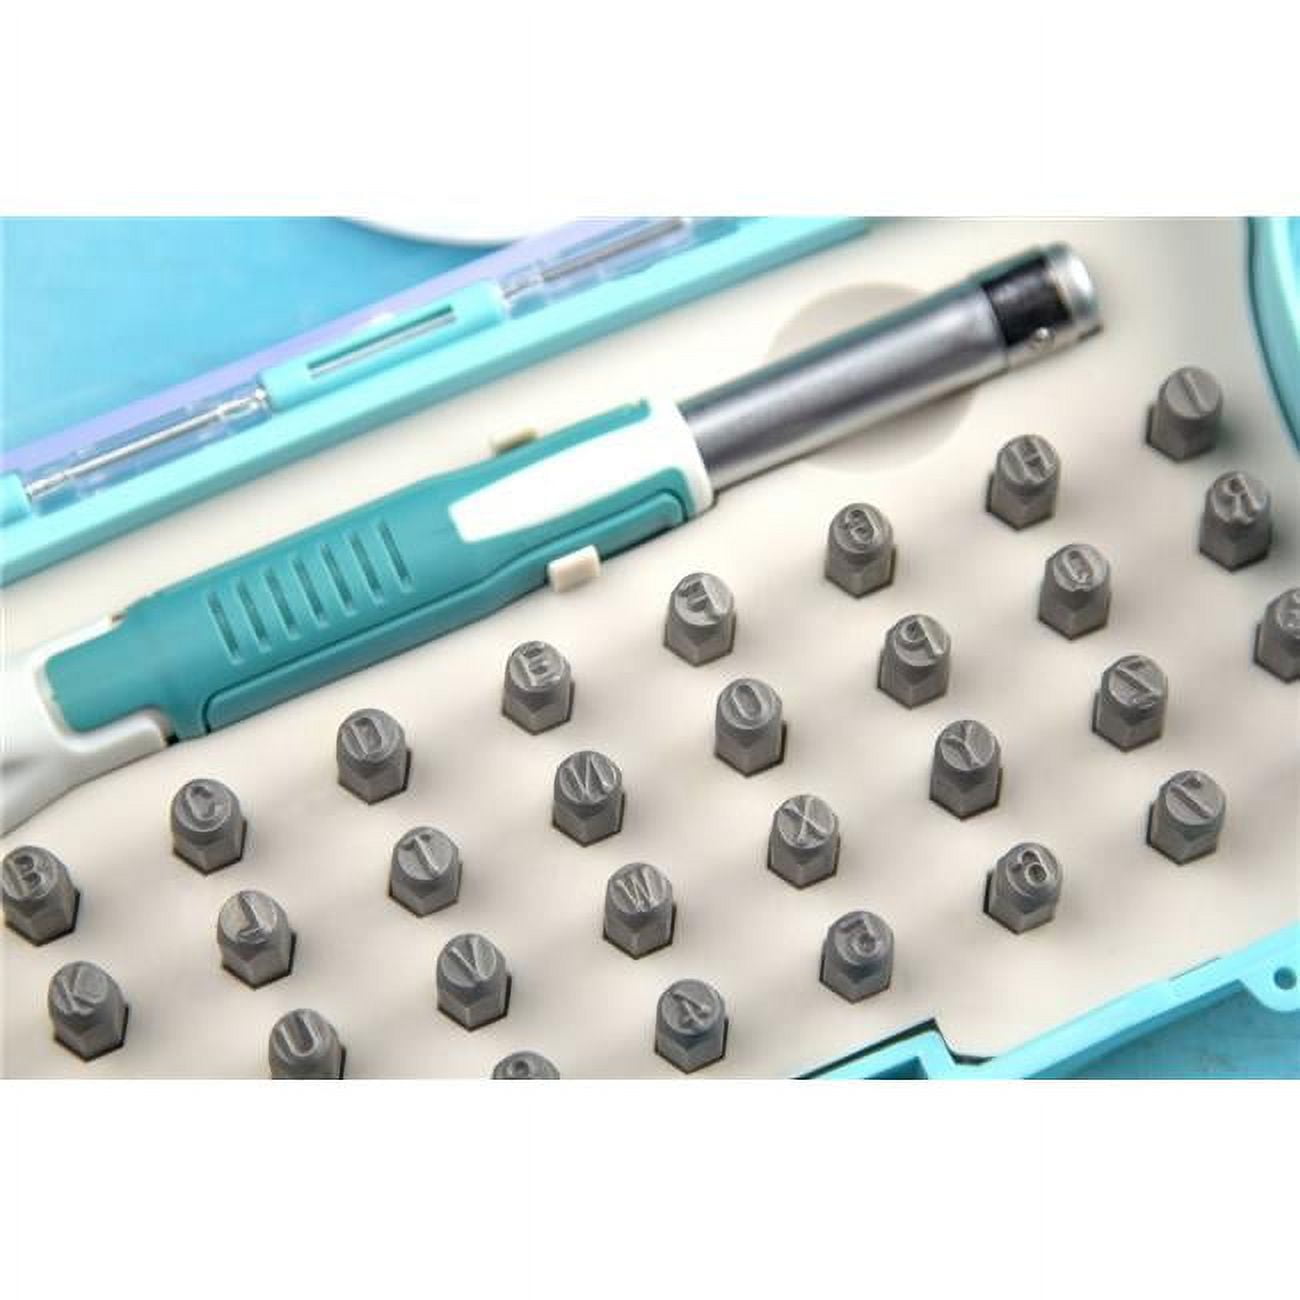 Cousin Stamp & Go Metal Stamping Tool Kit, Silver and Teal 